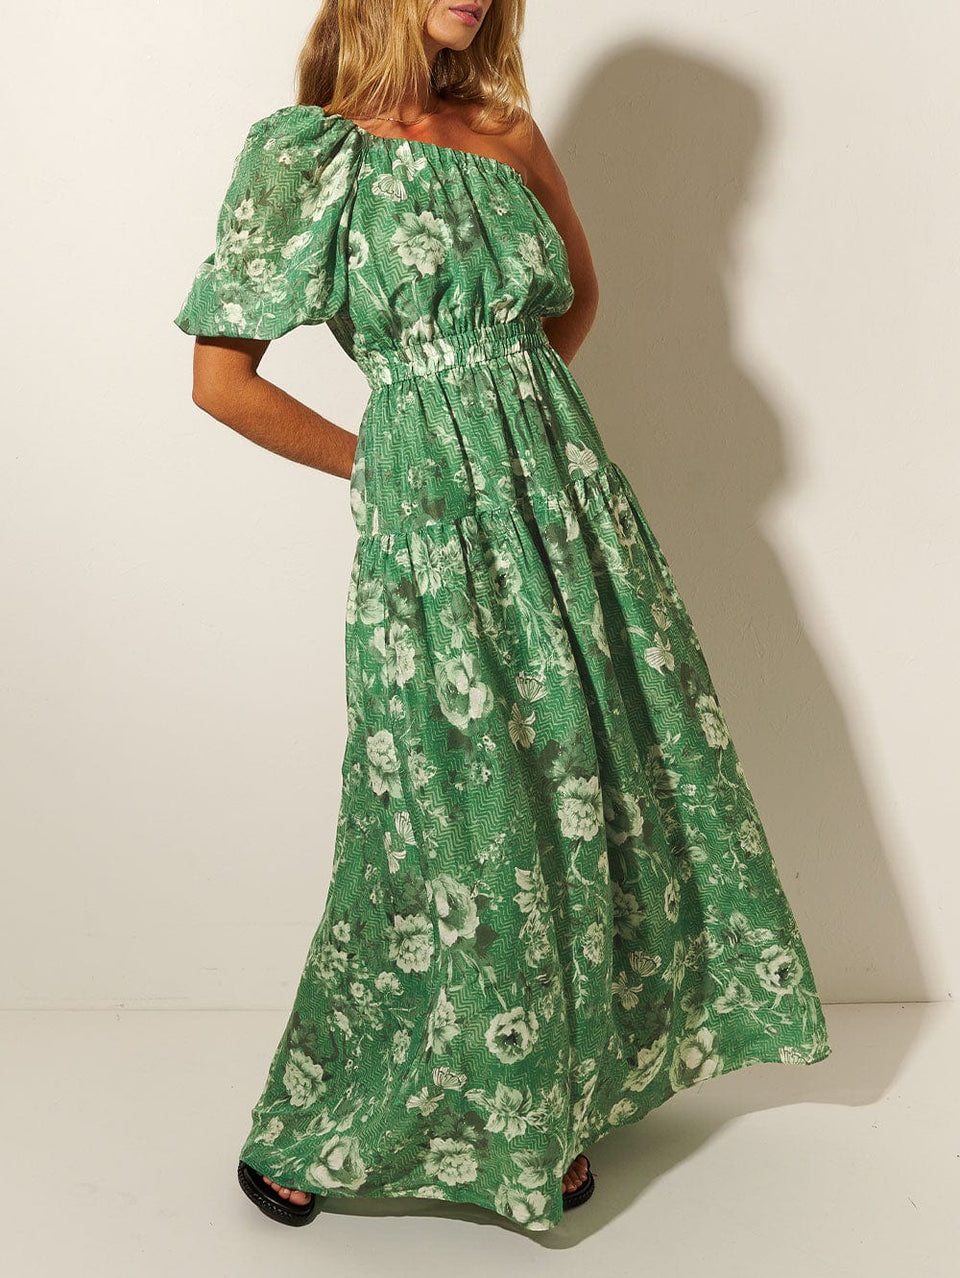 Studio model wears KIVARI Khalo Maxi Dress: A green floral one-shoulder dress with a short sleeve, elasticated front and waist, and tiered skirt.